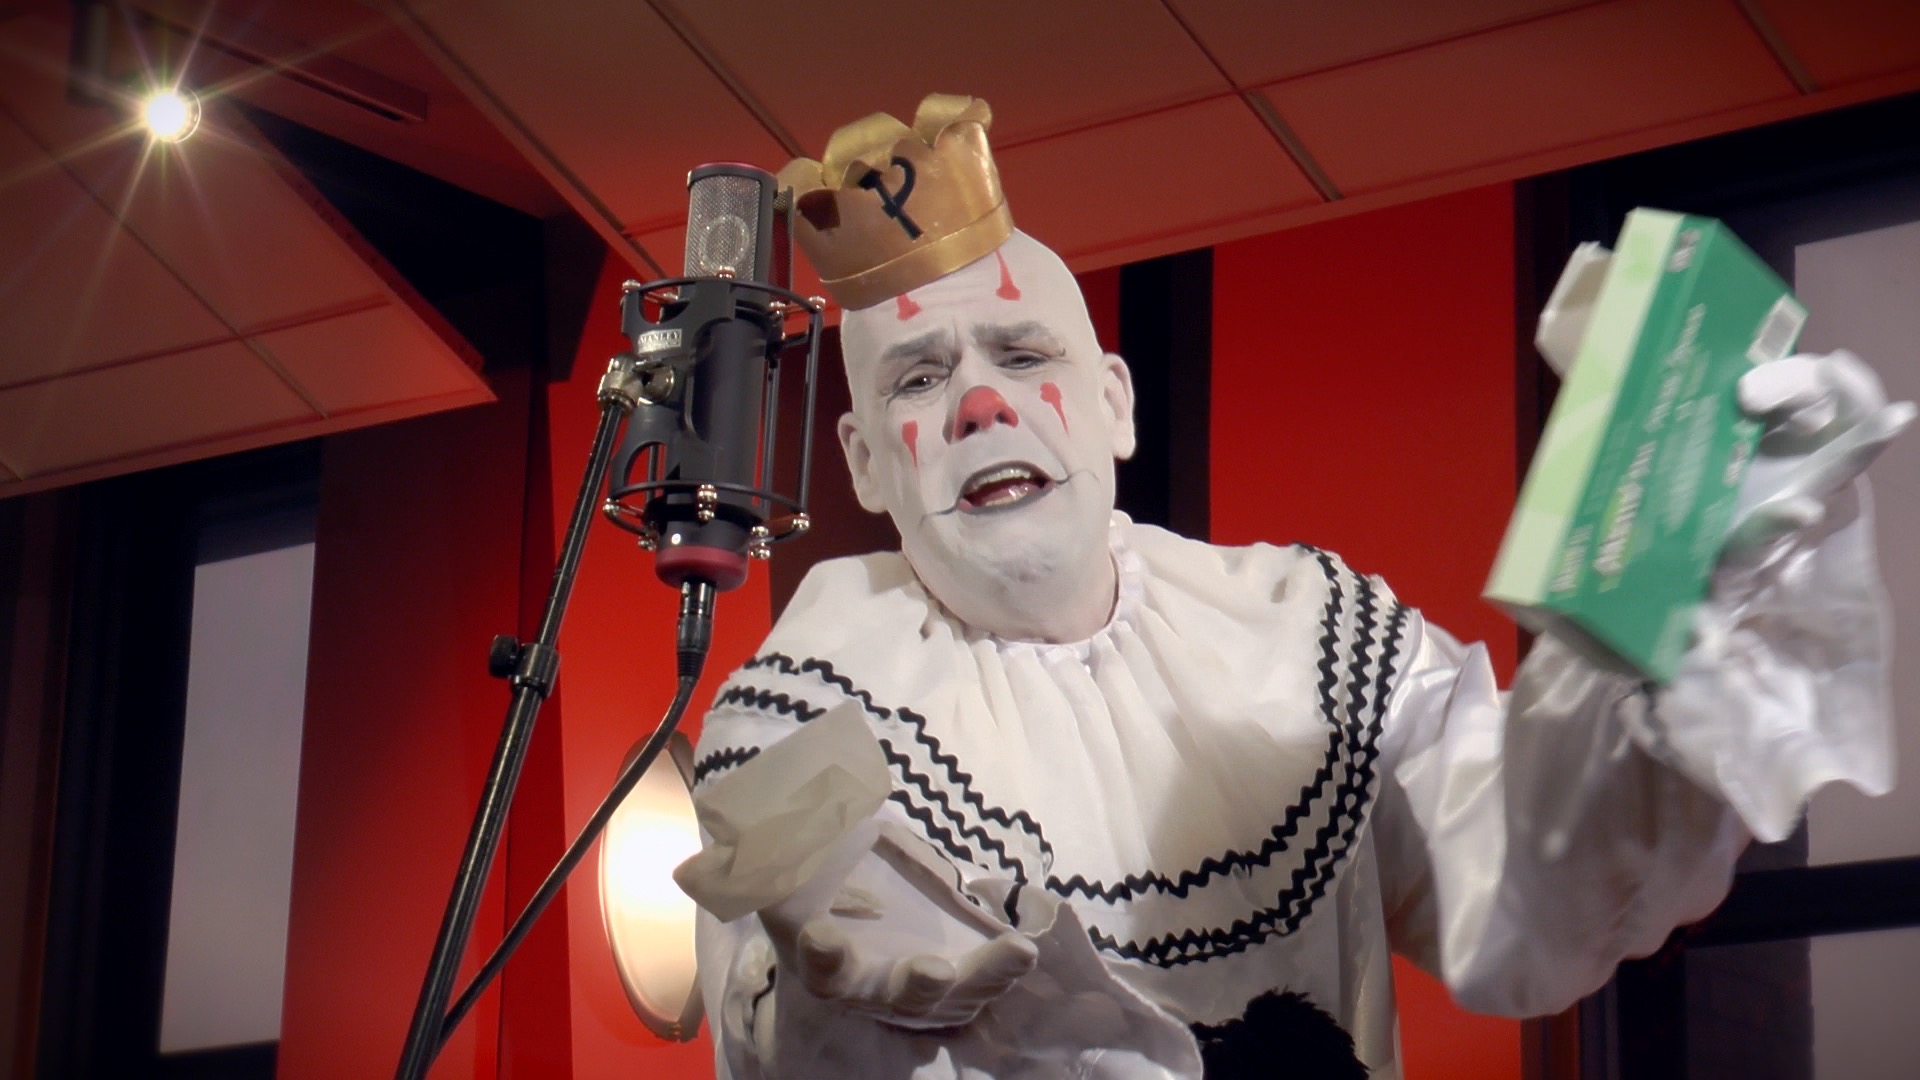 Puddles Pity Party performs in the Geary Studio